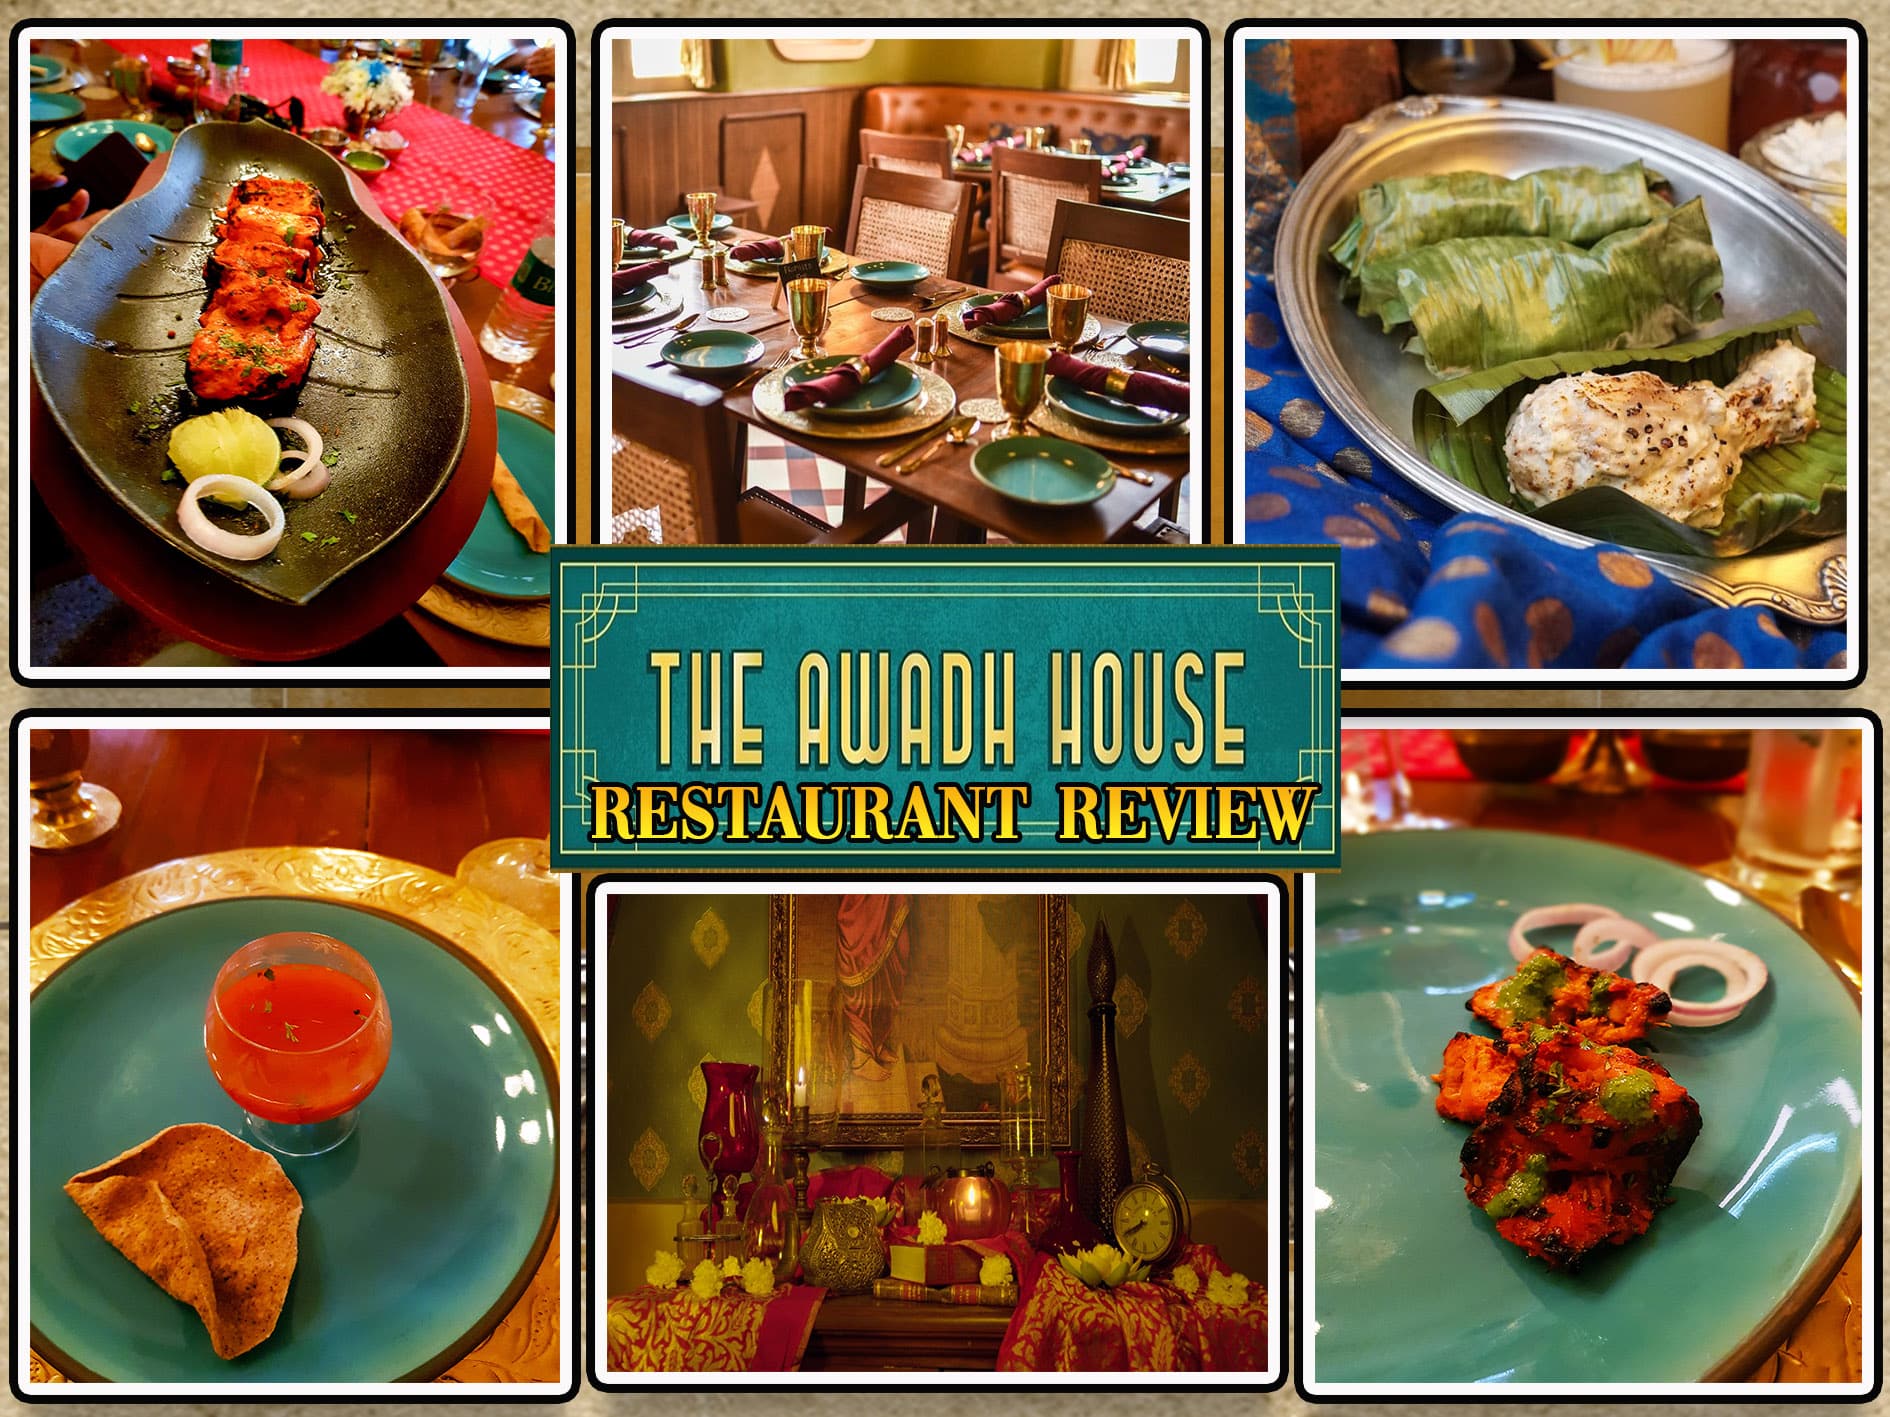 The Awadh House Restaurant Review - One Epic Road Trip Blog